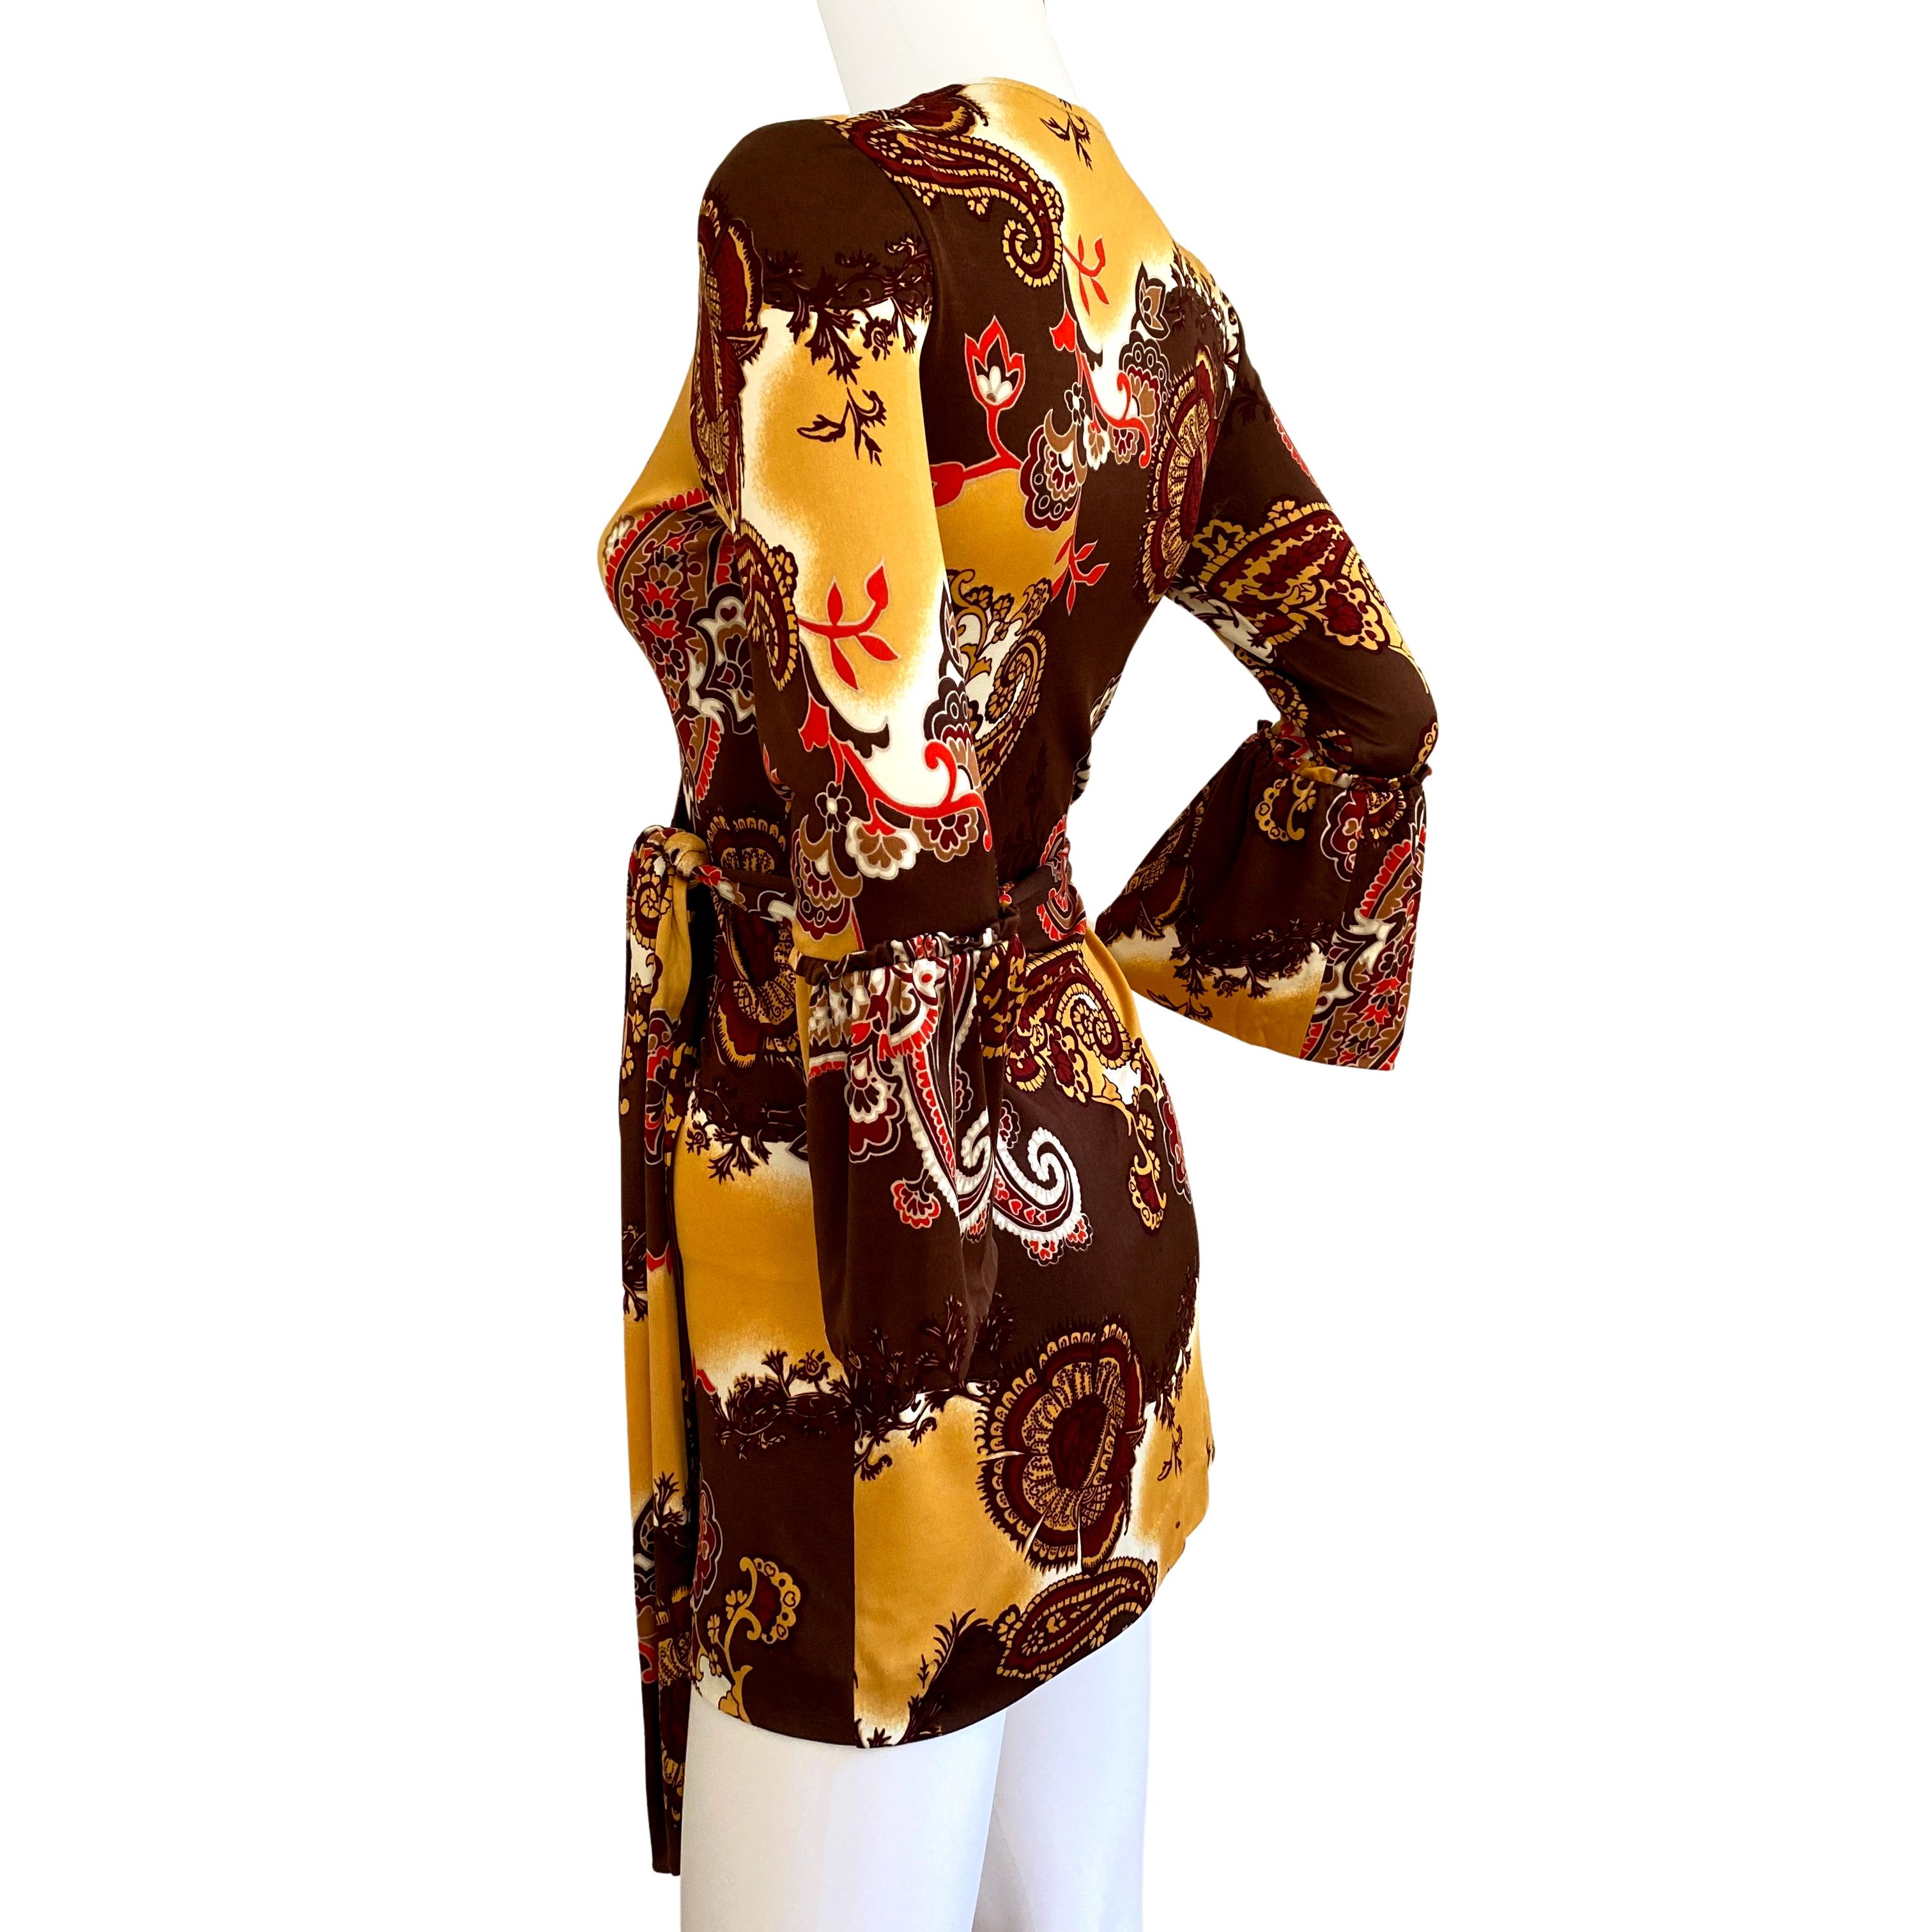  
Original gold-brown paisley print from Flora Kung.

FLORA KUNG silk dresses are made in premiere quality, long-filament silk yarn which gives a natural simmering glow and a buttery, luxurious feel. 
Available in sizes 4  
US 4 = UK 8 = French